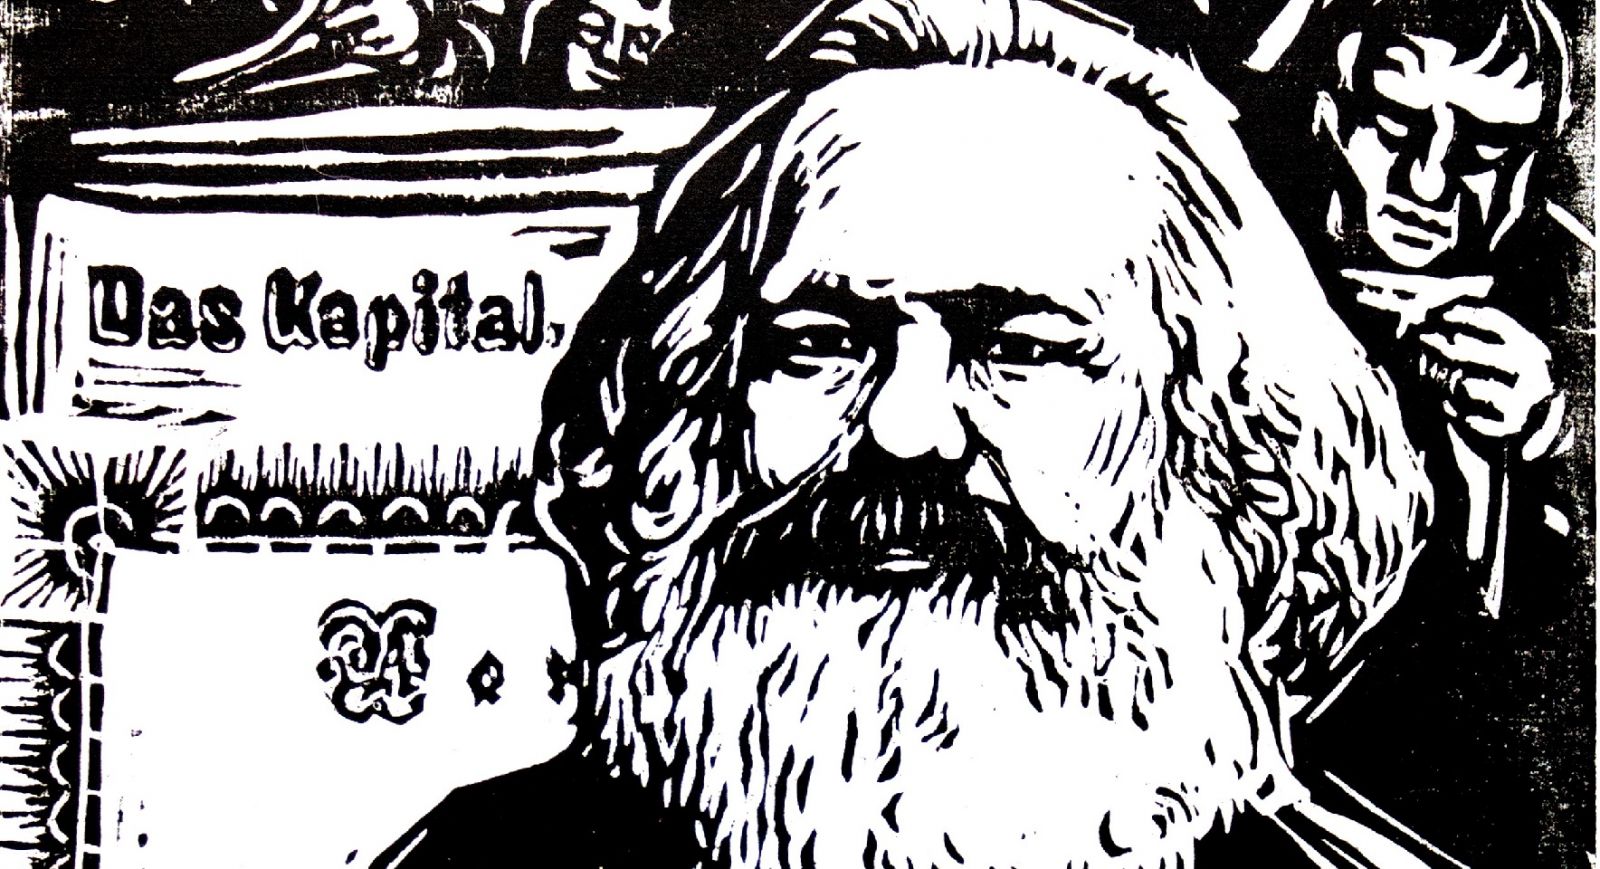 Karl Marx - Cropped version. Artist: Holzschnitt made in 1970 by Robert Diedrichs (1923–1995), German graphic artist, painter and illustrator / Royal Opera House Covent Garden. (CC BY 2.0). Source: Wikimedia Commons.